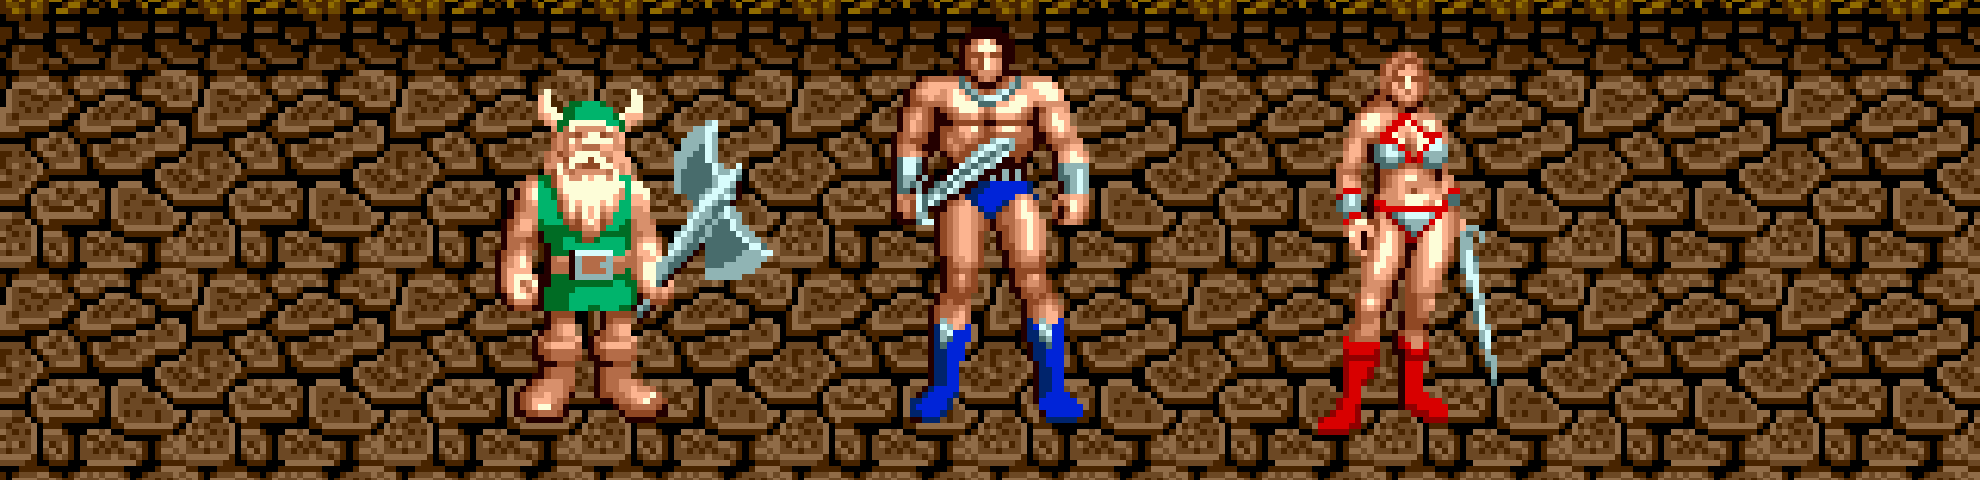 The heroes of Golden Axe: A battle axe wielding dwarf, a great sword using male human, and a long sword-using female human. They stand against a brown tiled background.